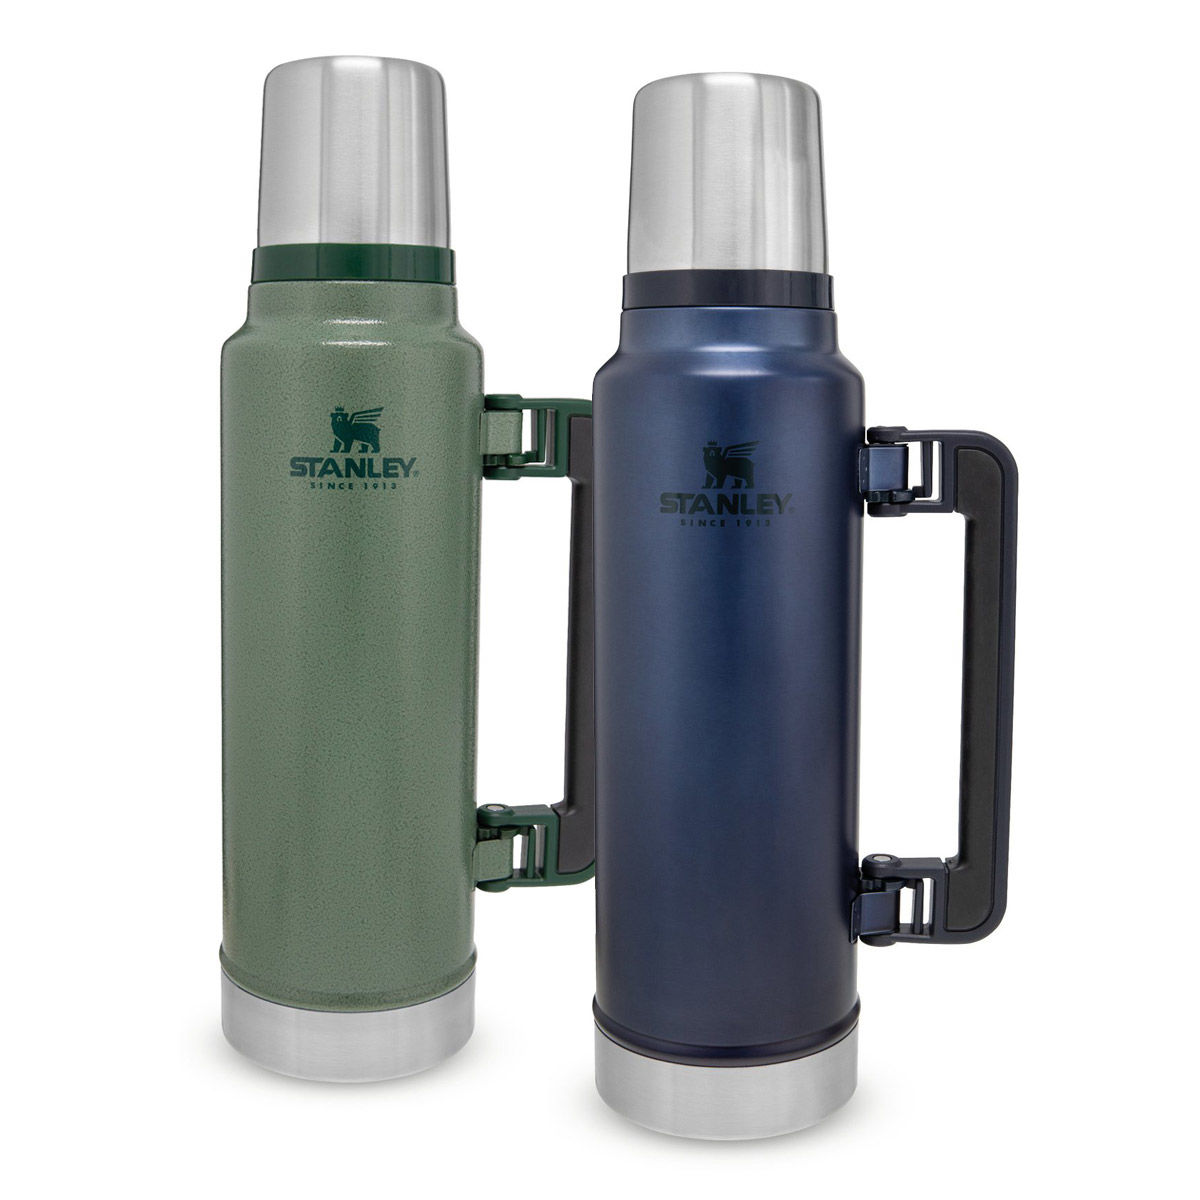 Cold Drinks STANLEY CLASSIC VACUUM BOTTLE 1.4L GREEN Insulated Flask for Hot